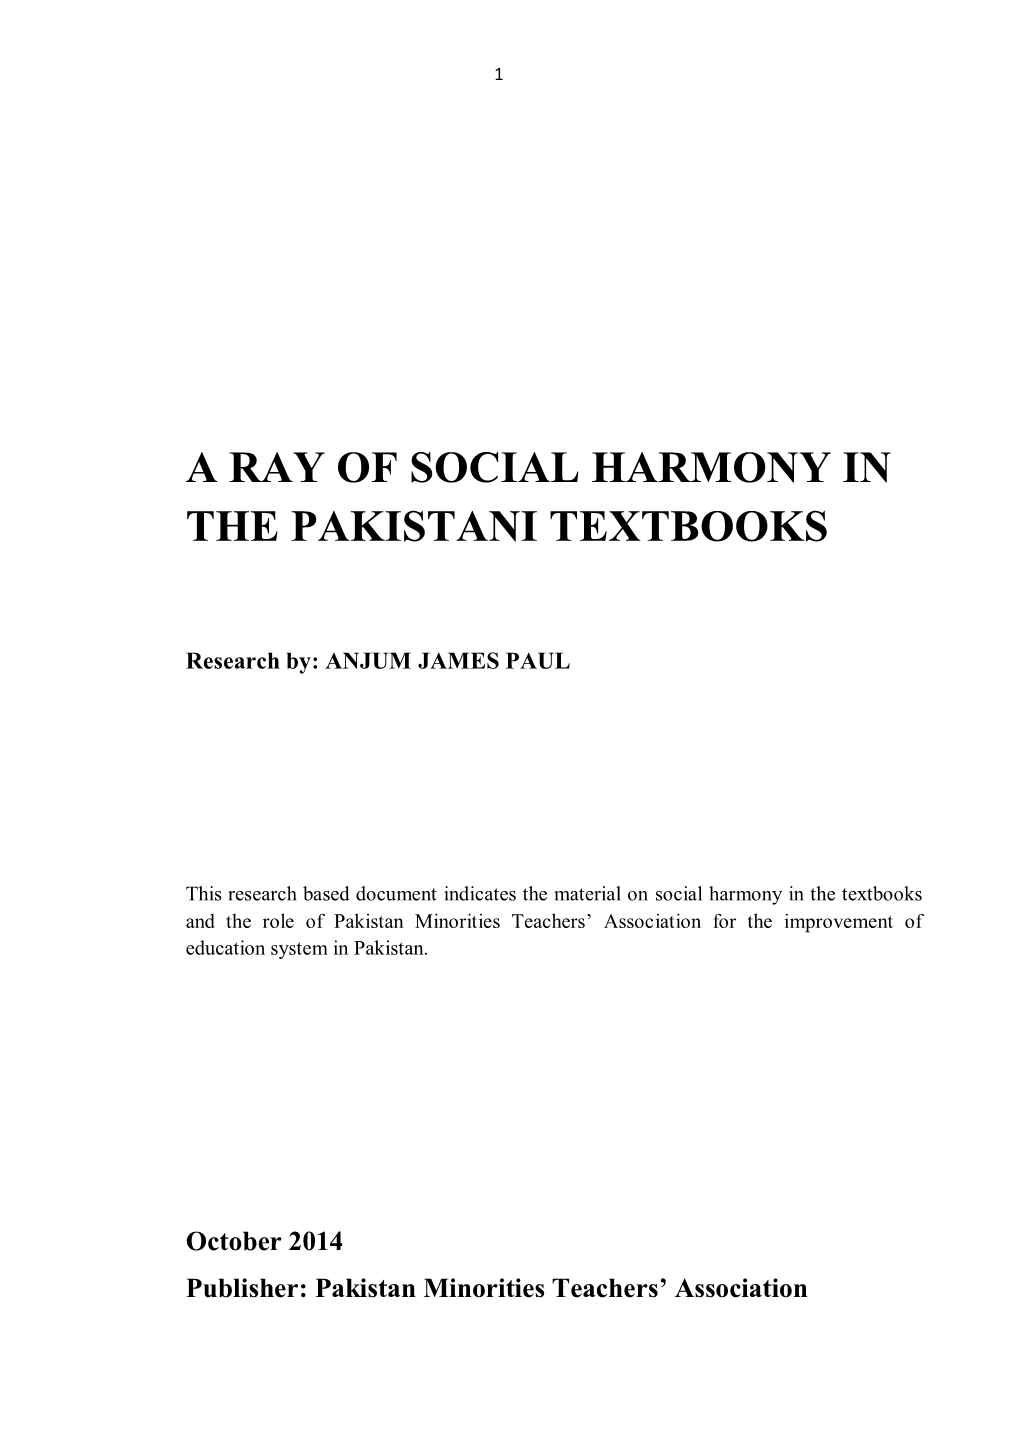 A Ray of Social Harmony in the Pakistani Textbooks